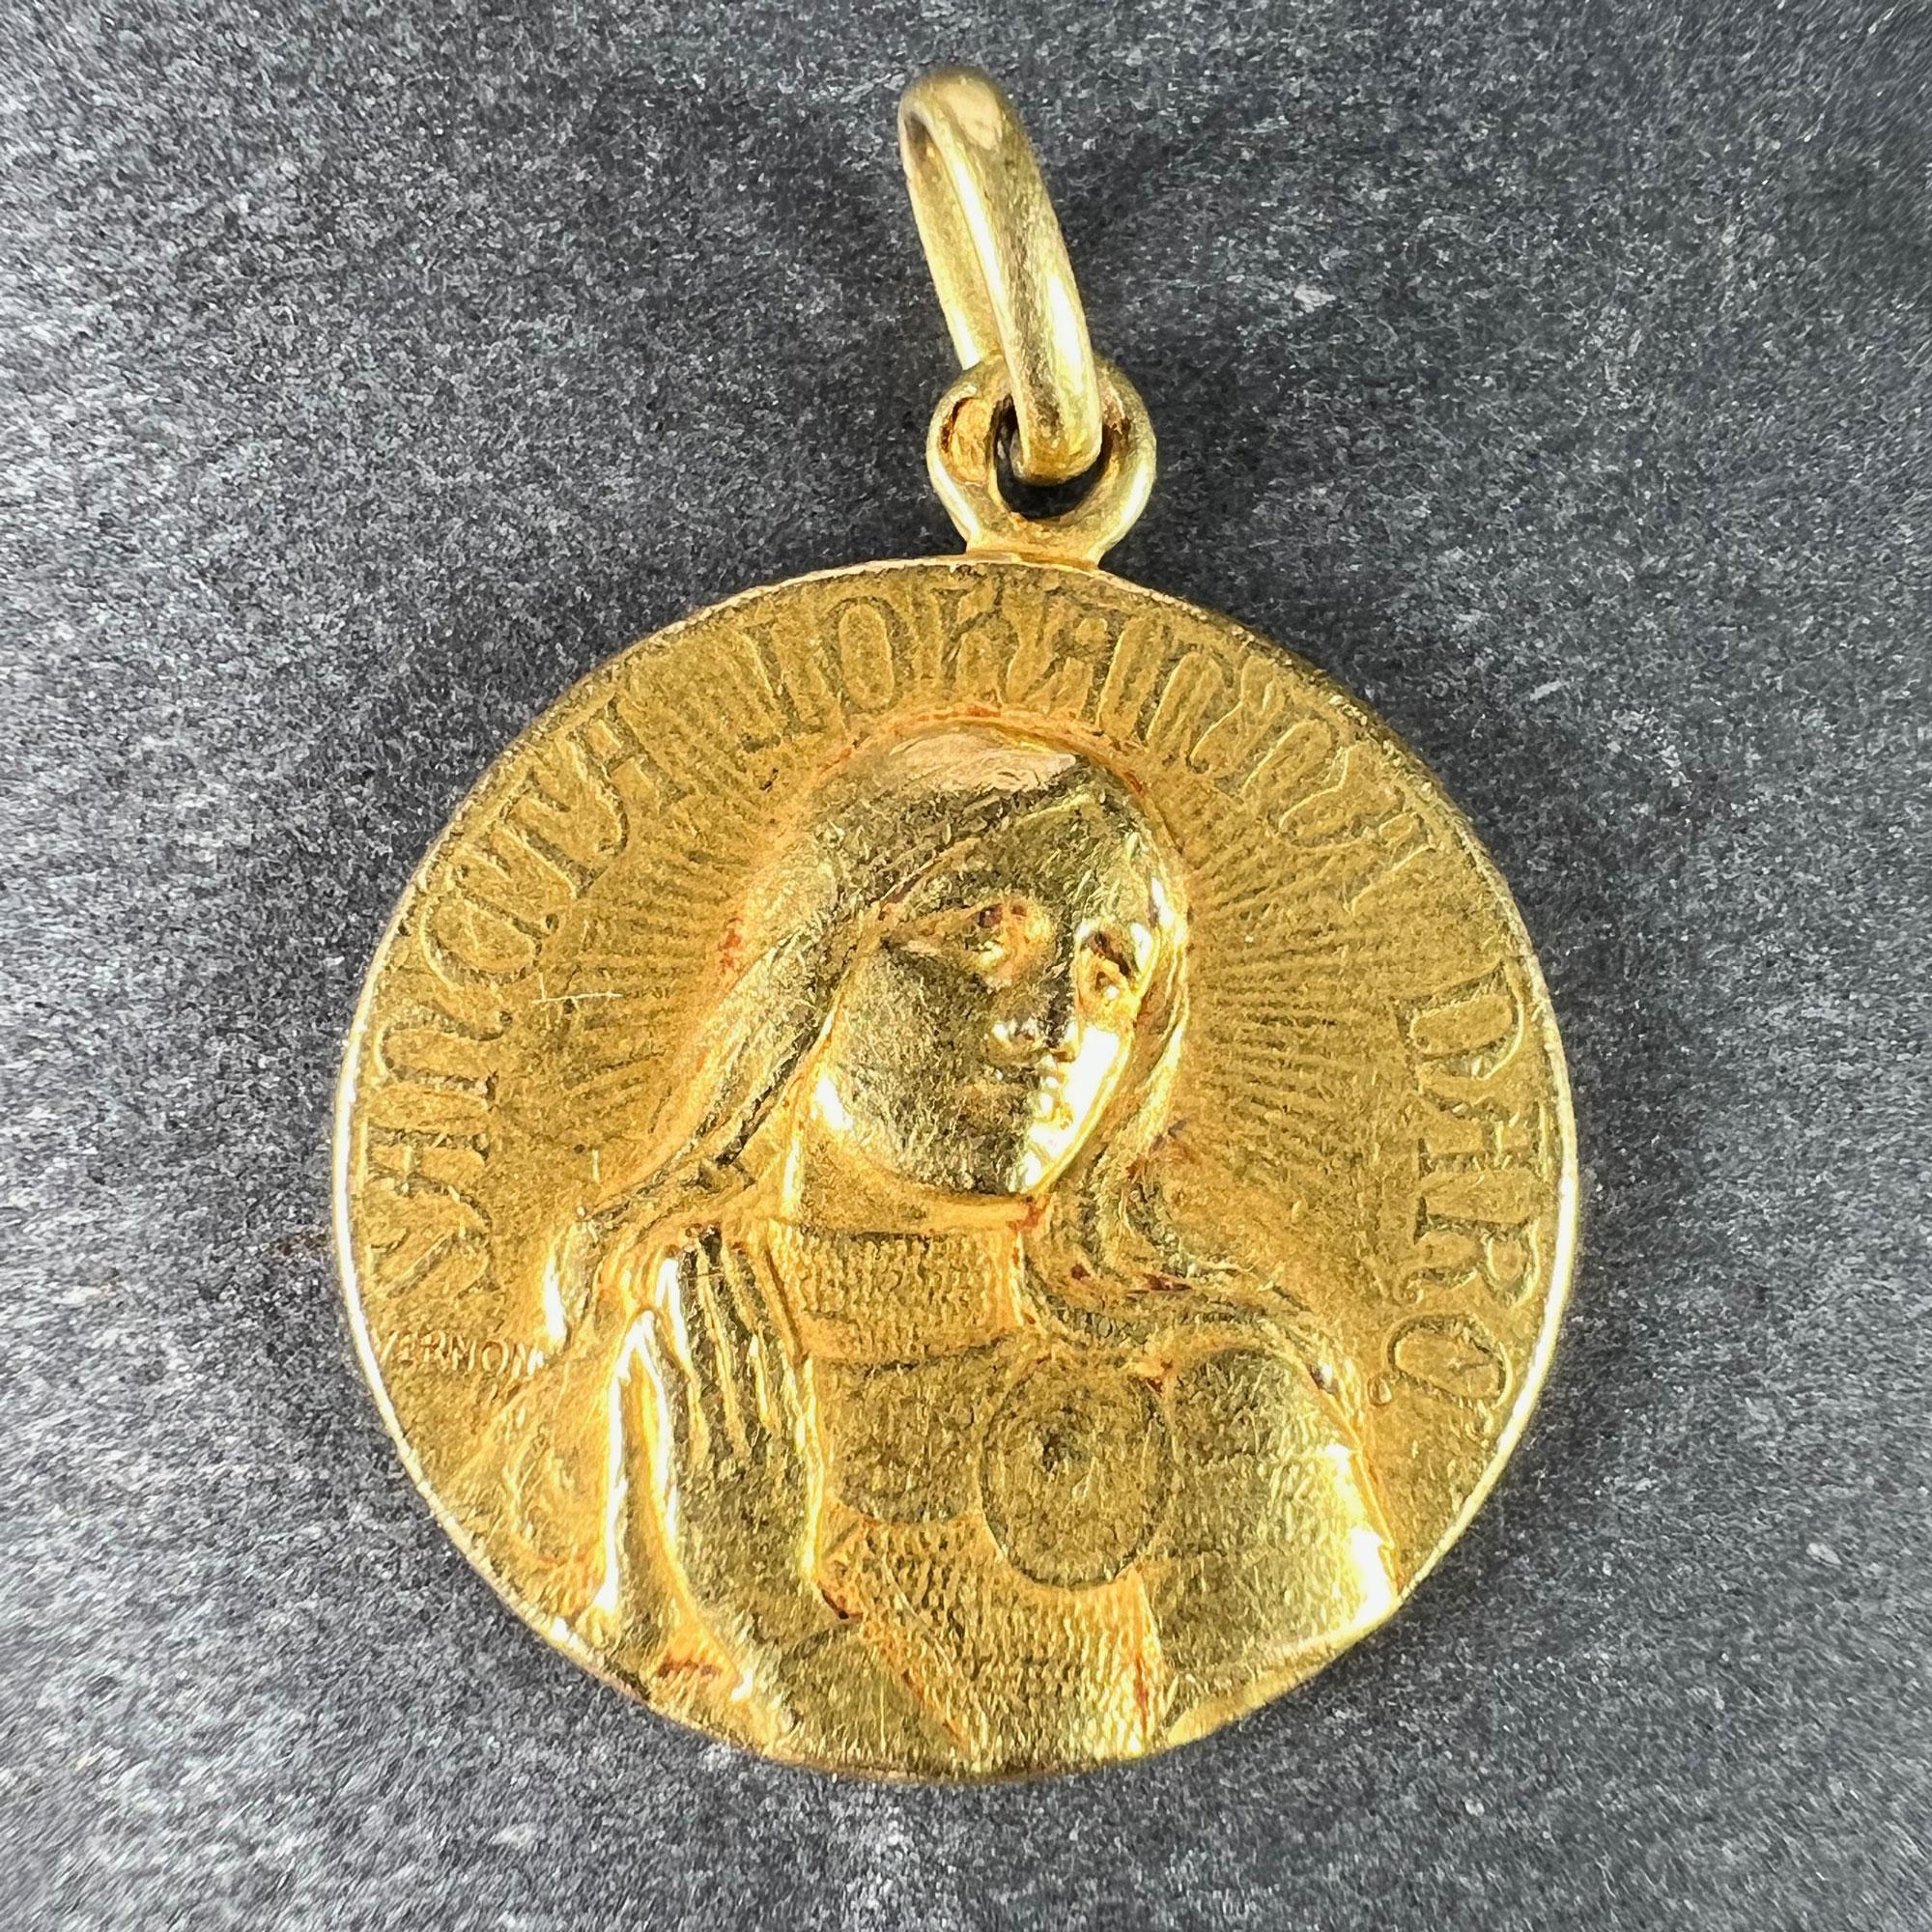 A French 18 karat (18K) yellow gold charm pendant designed as a round medal with a relief of Joan of Arc in armour to one side praying, the words 'Sancta Johanna D'Arc', to the reverse a shield bearing her coat of arms with lilies and ribbons.